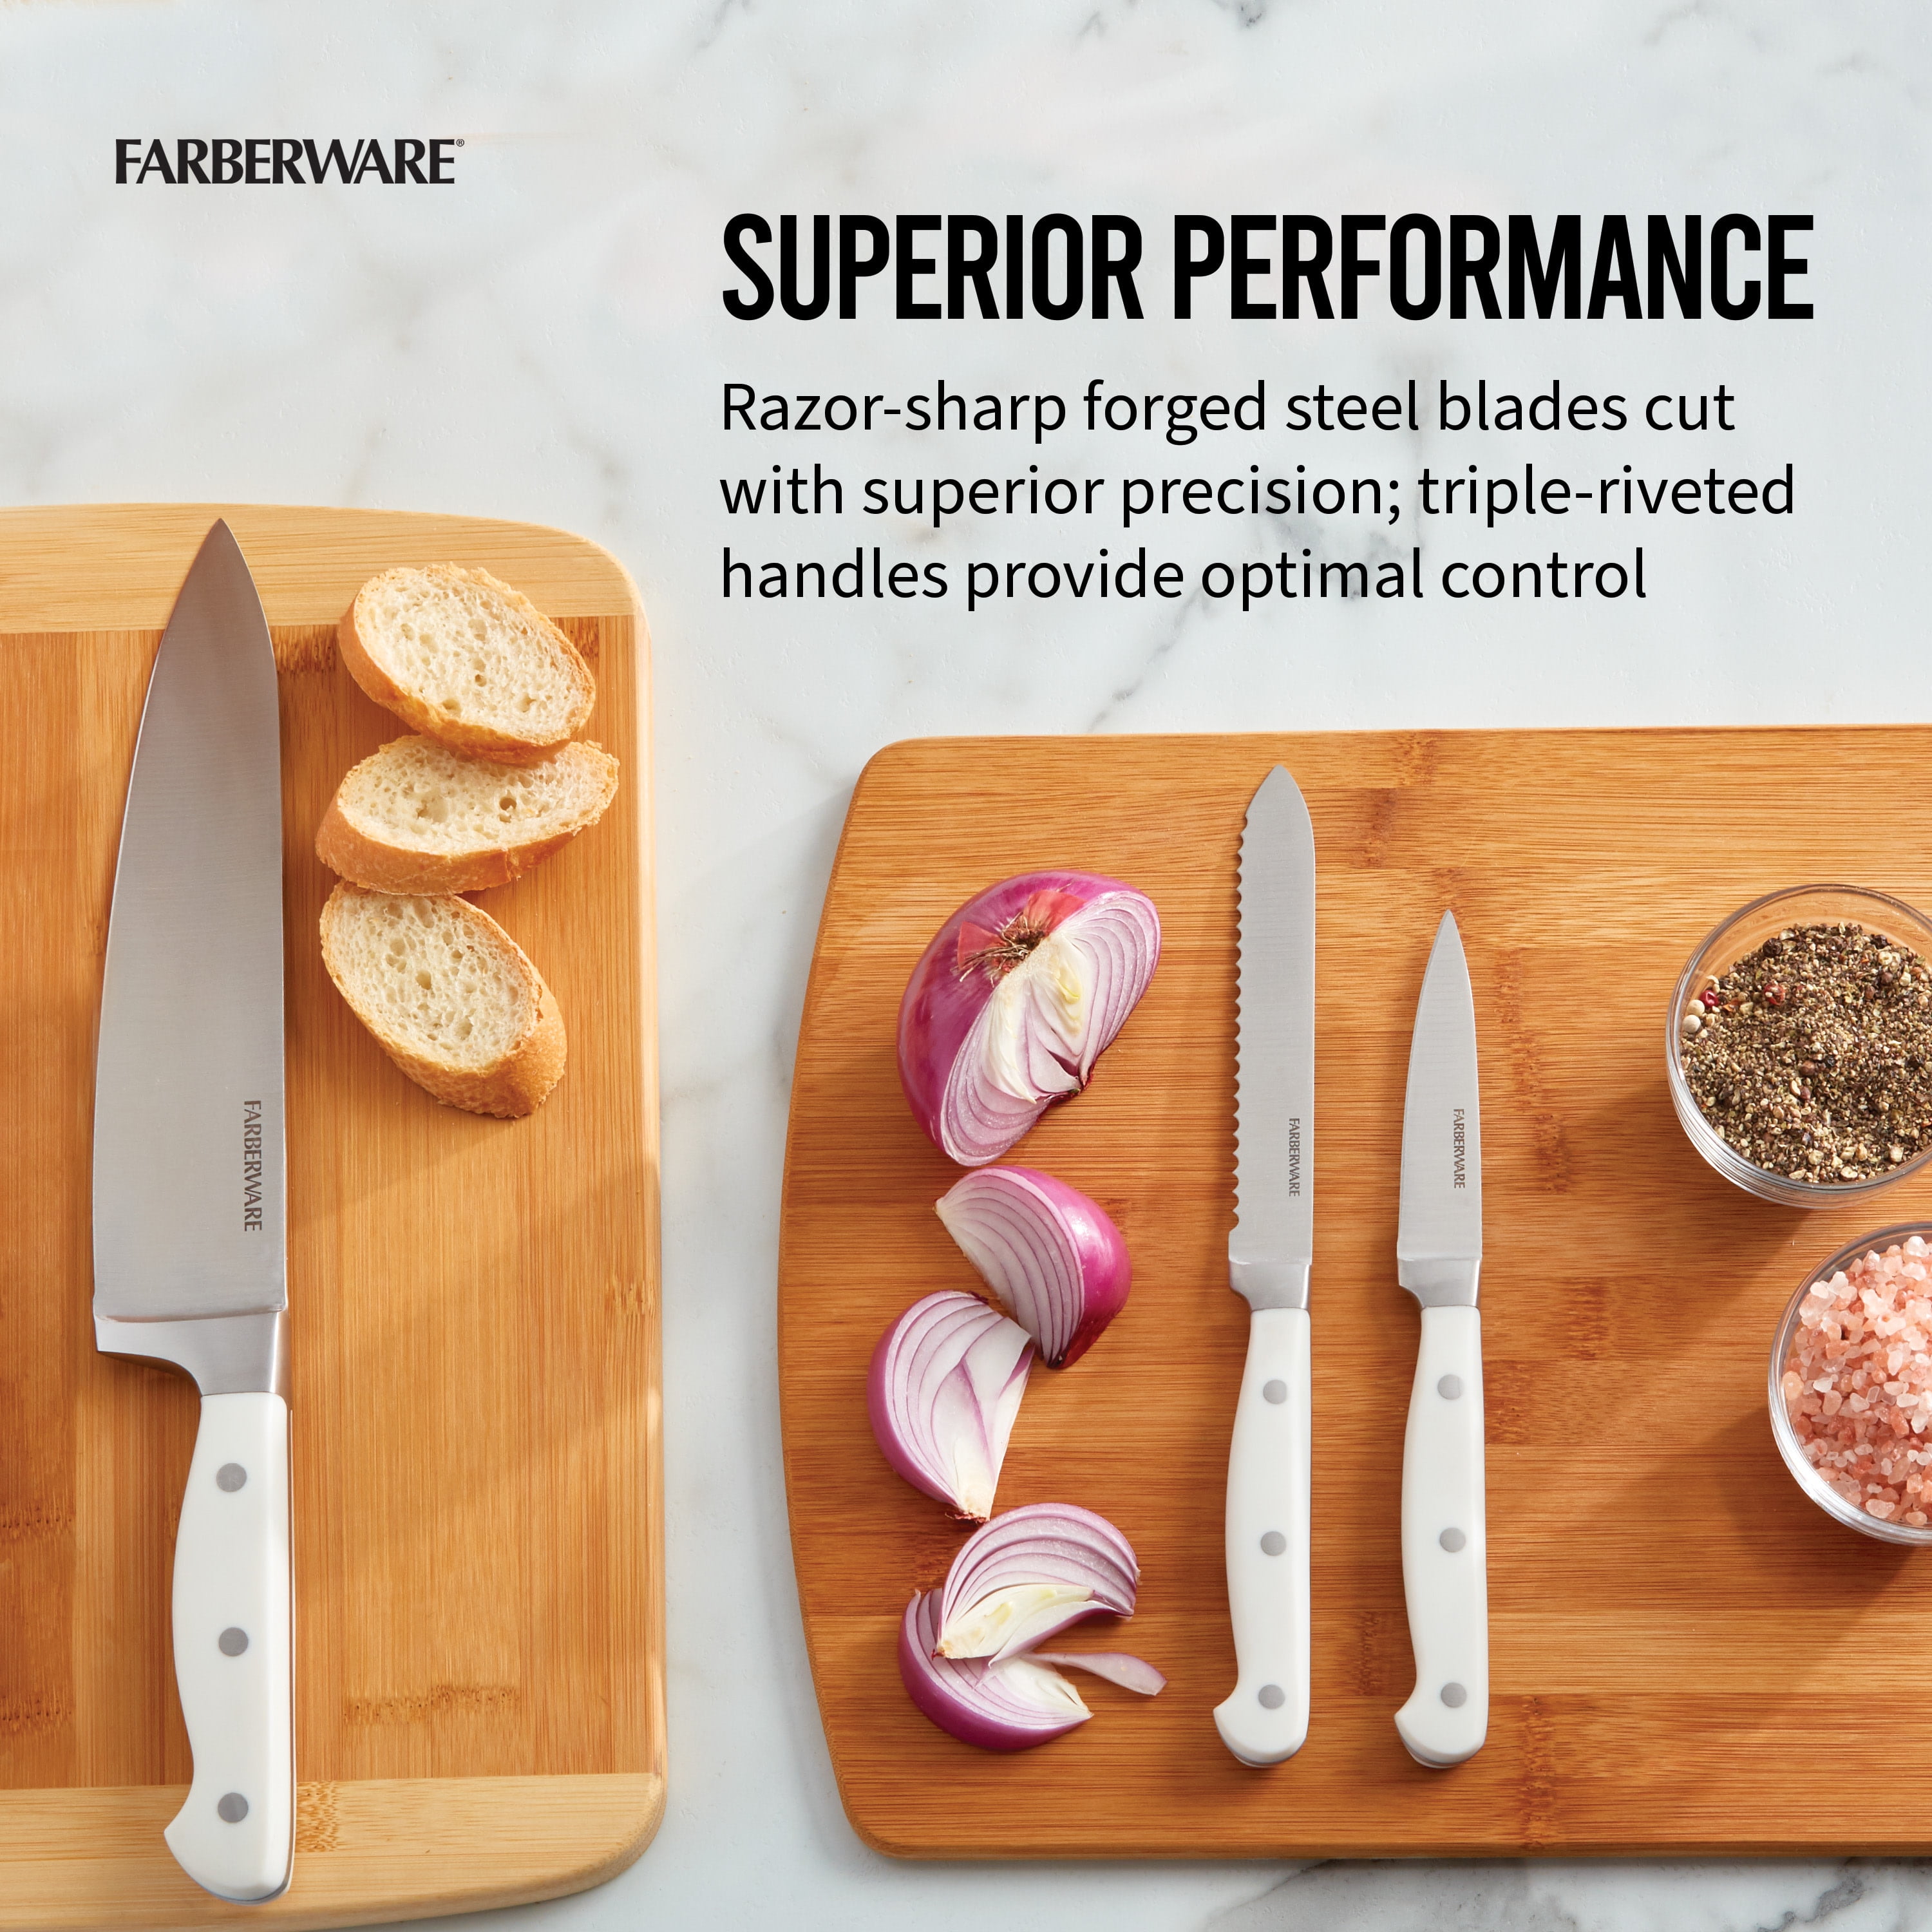 Farberware 3 Piece Knife Set for the Galley